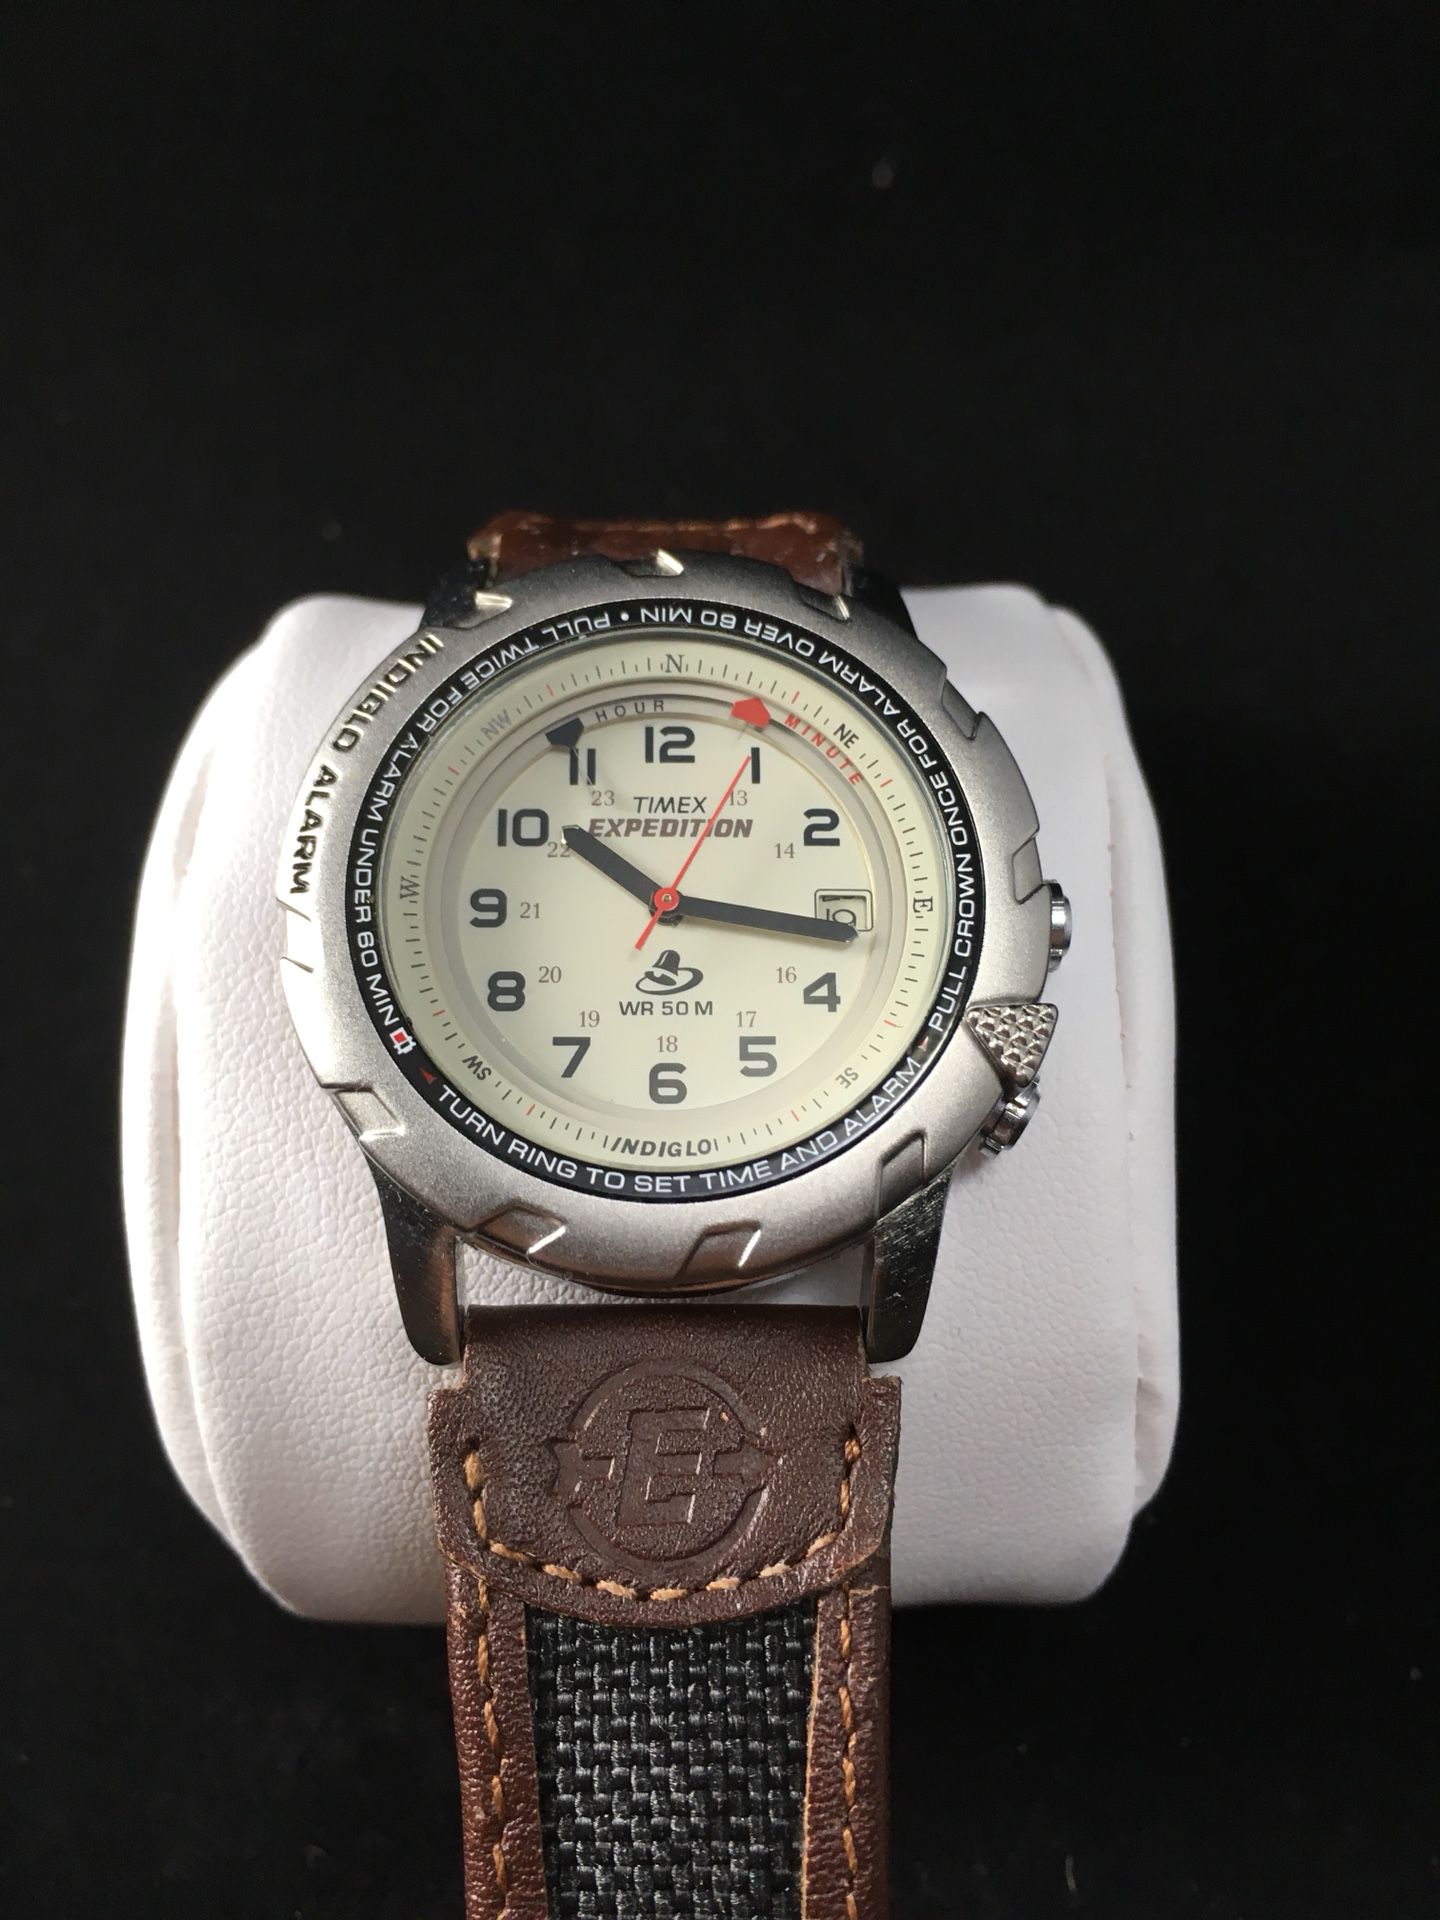 TIMEX Expedition T47902 Easy Set Alarm Watch for Sale in Madison, AL -  OfferUp